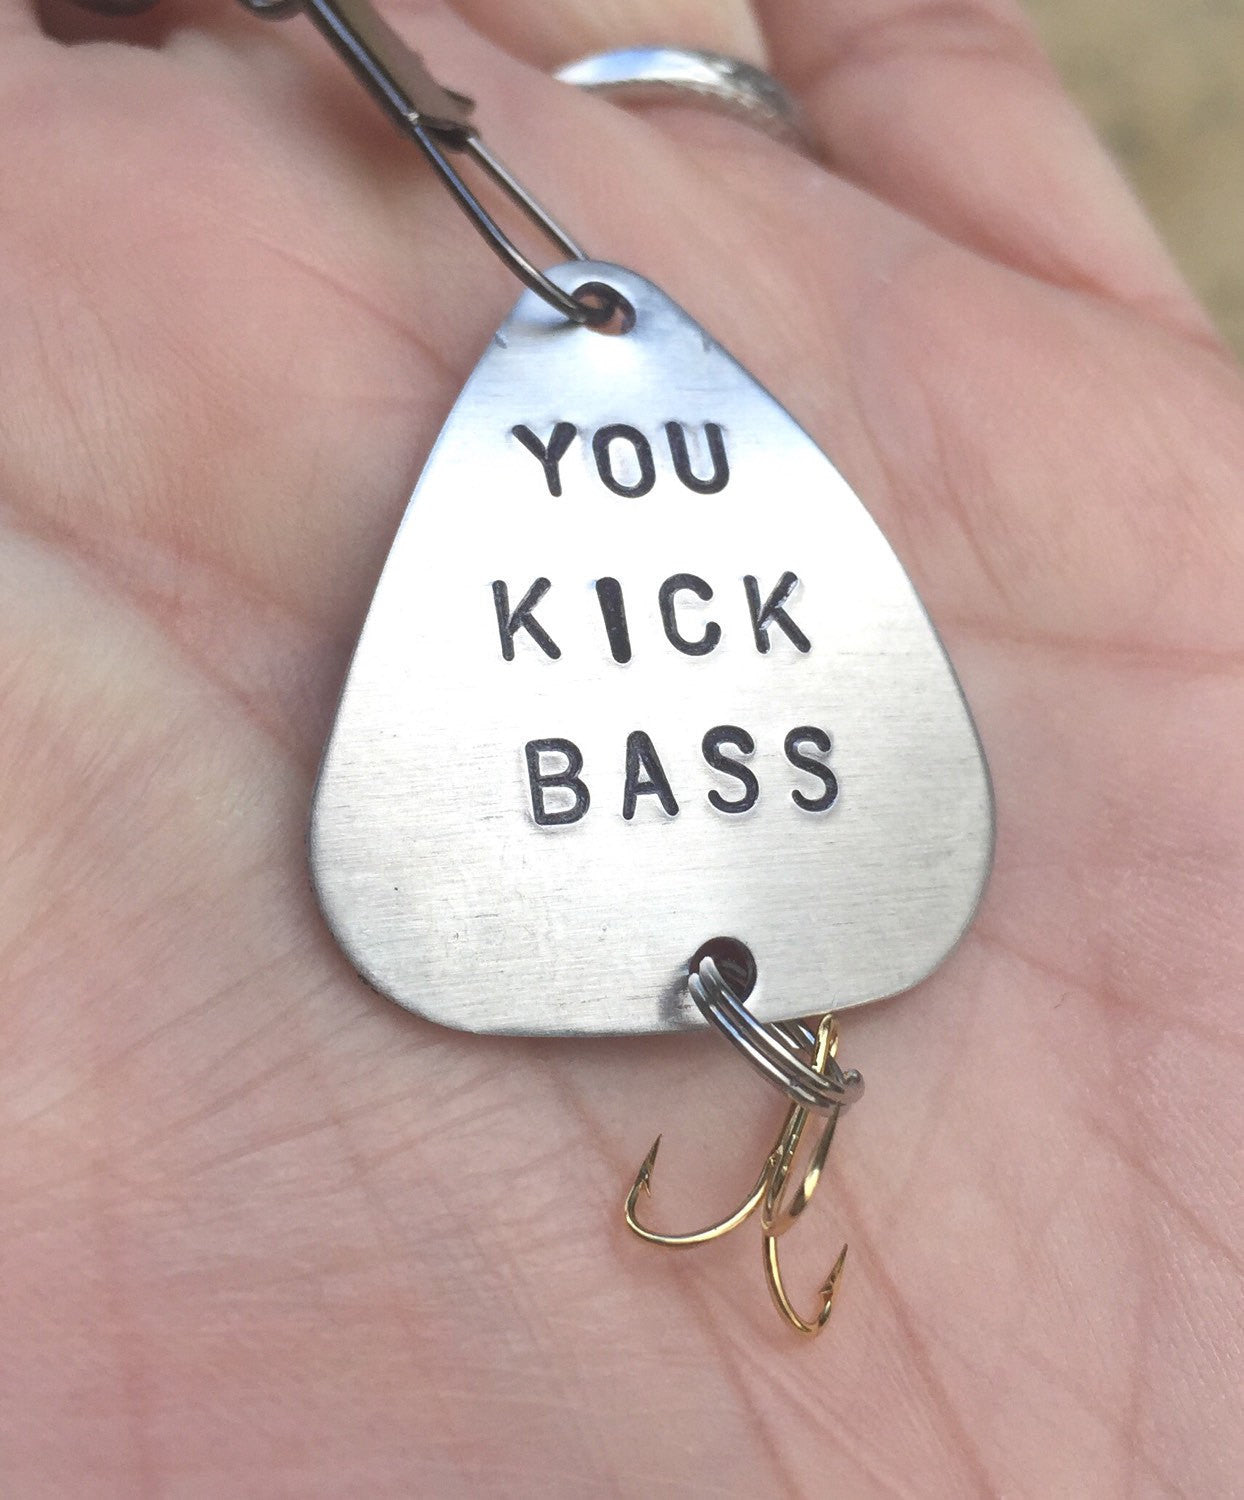 Fishing Lure,Fathers Day Gift, You Kick Bass, For Him, Boyfriend Gift